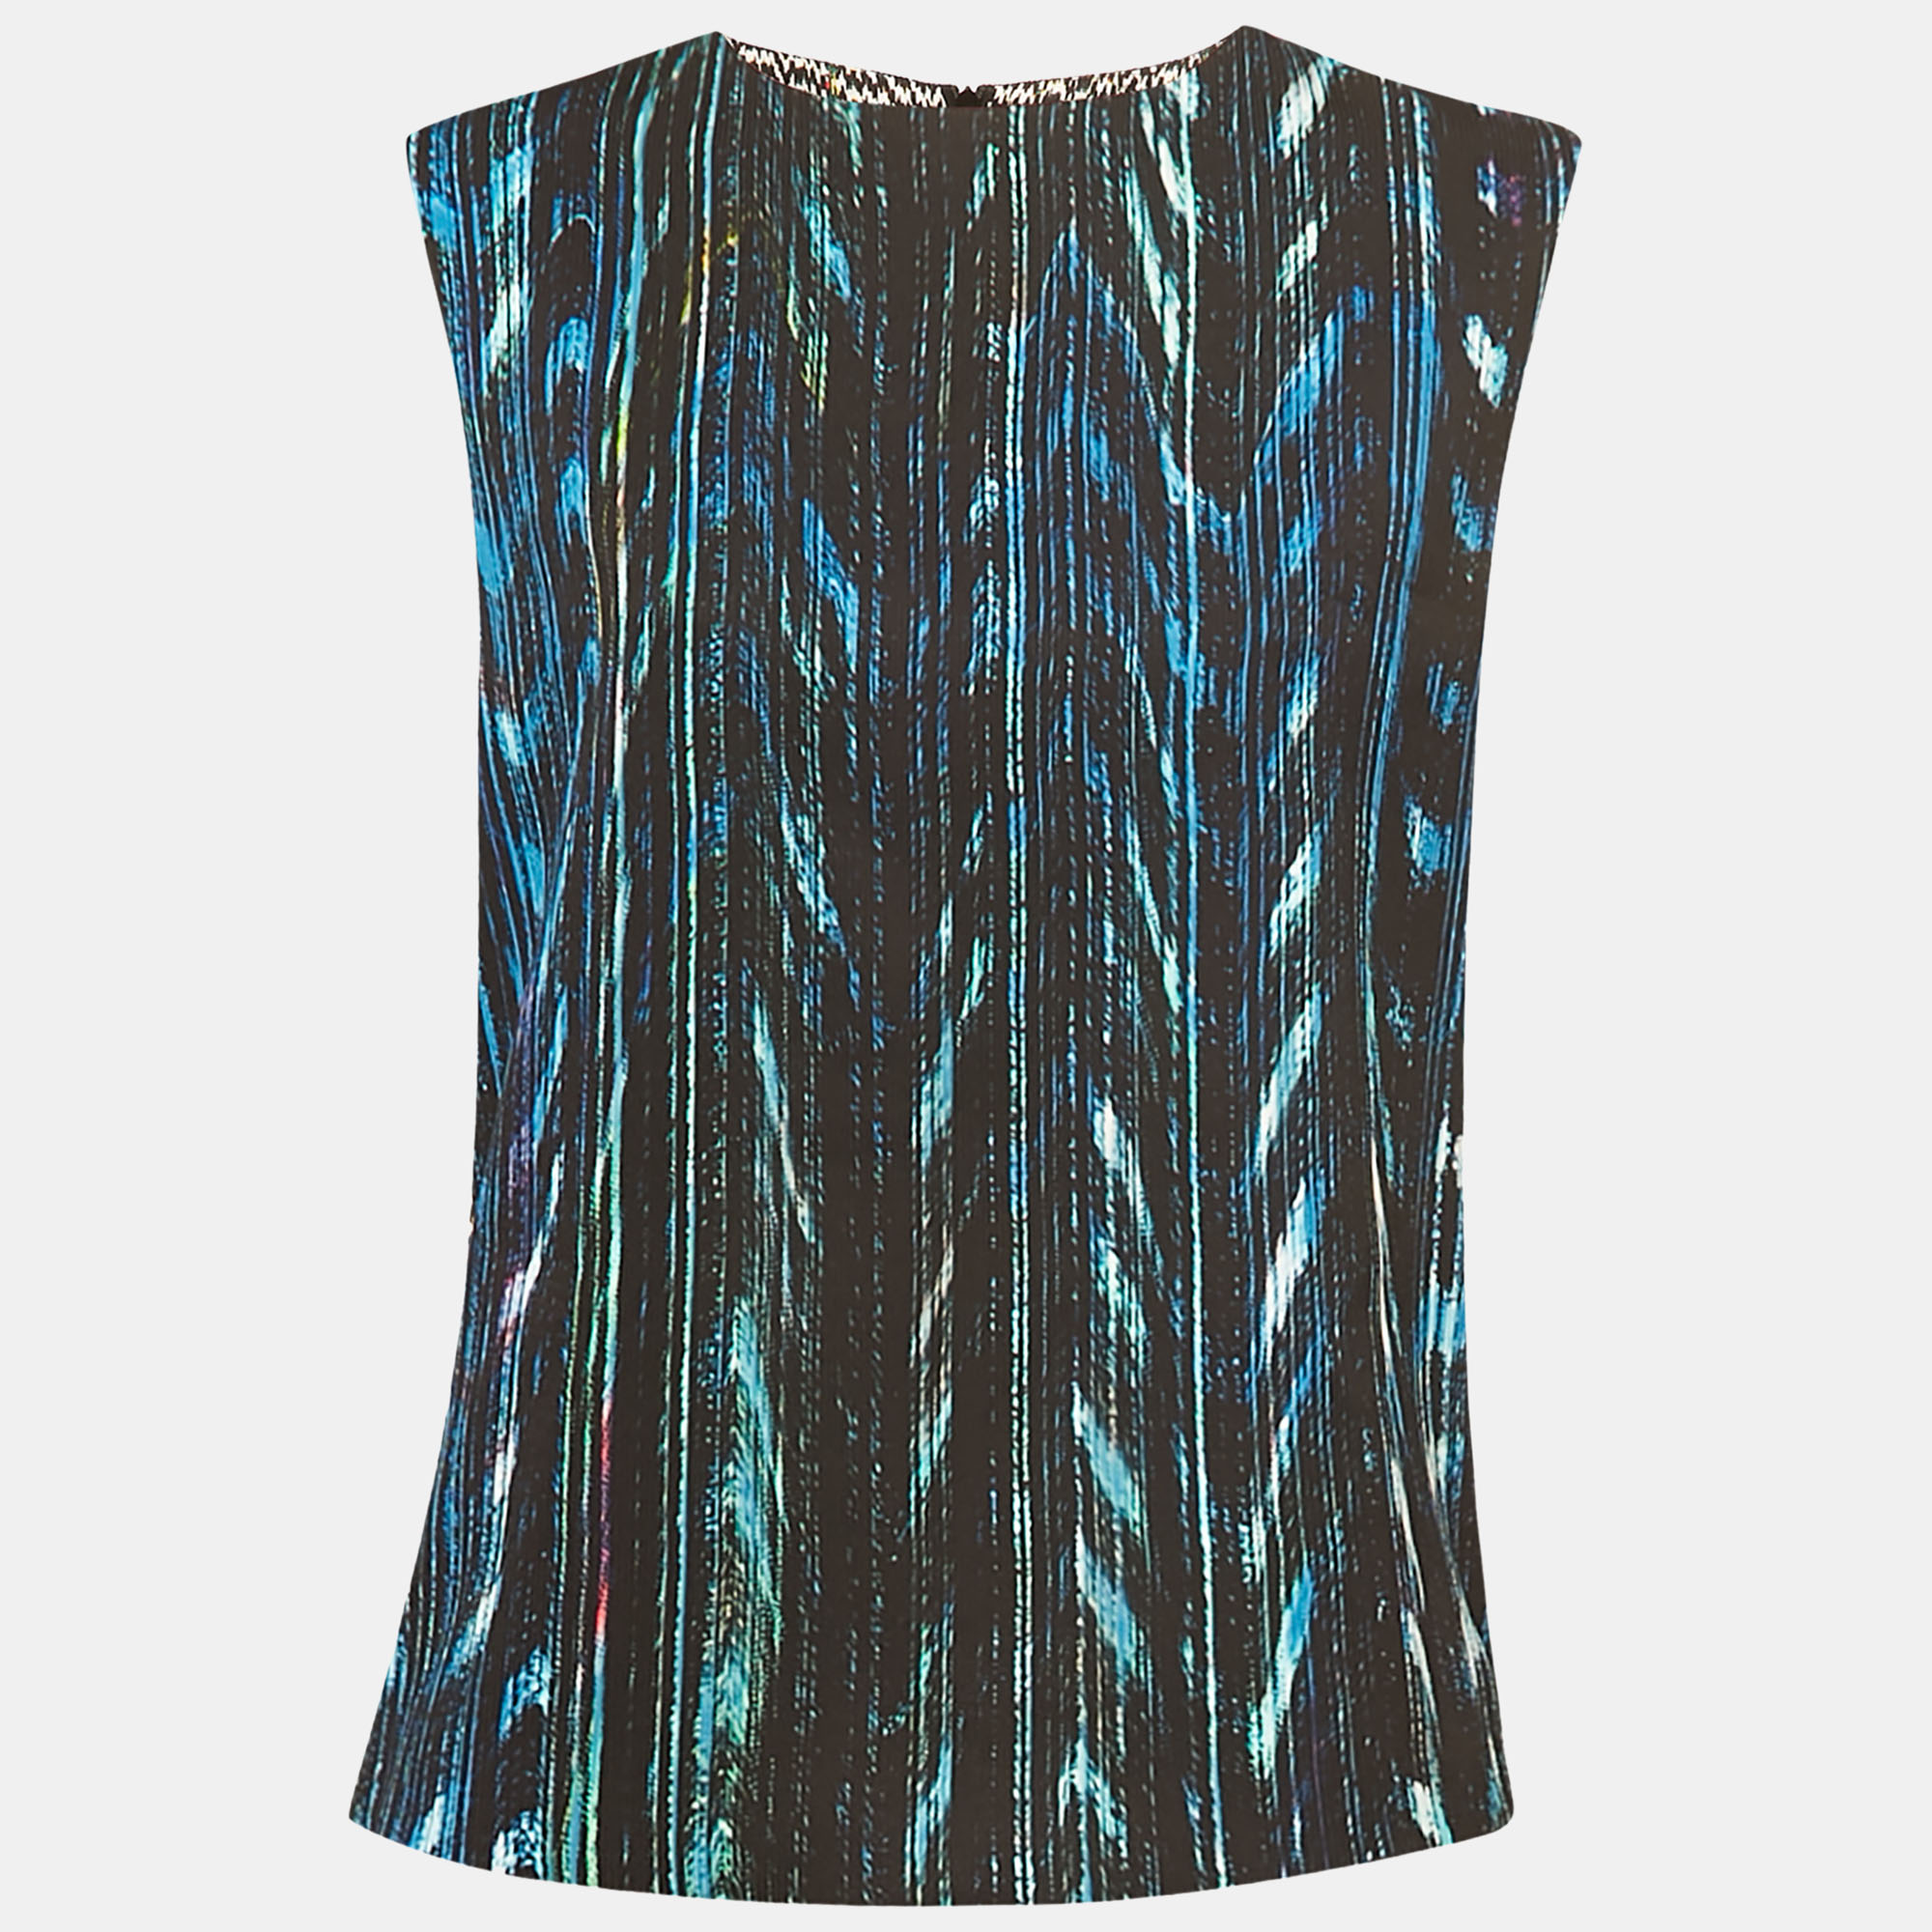 Kenzo Multicolor Printed Textured Sleeveless Top M